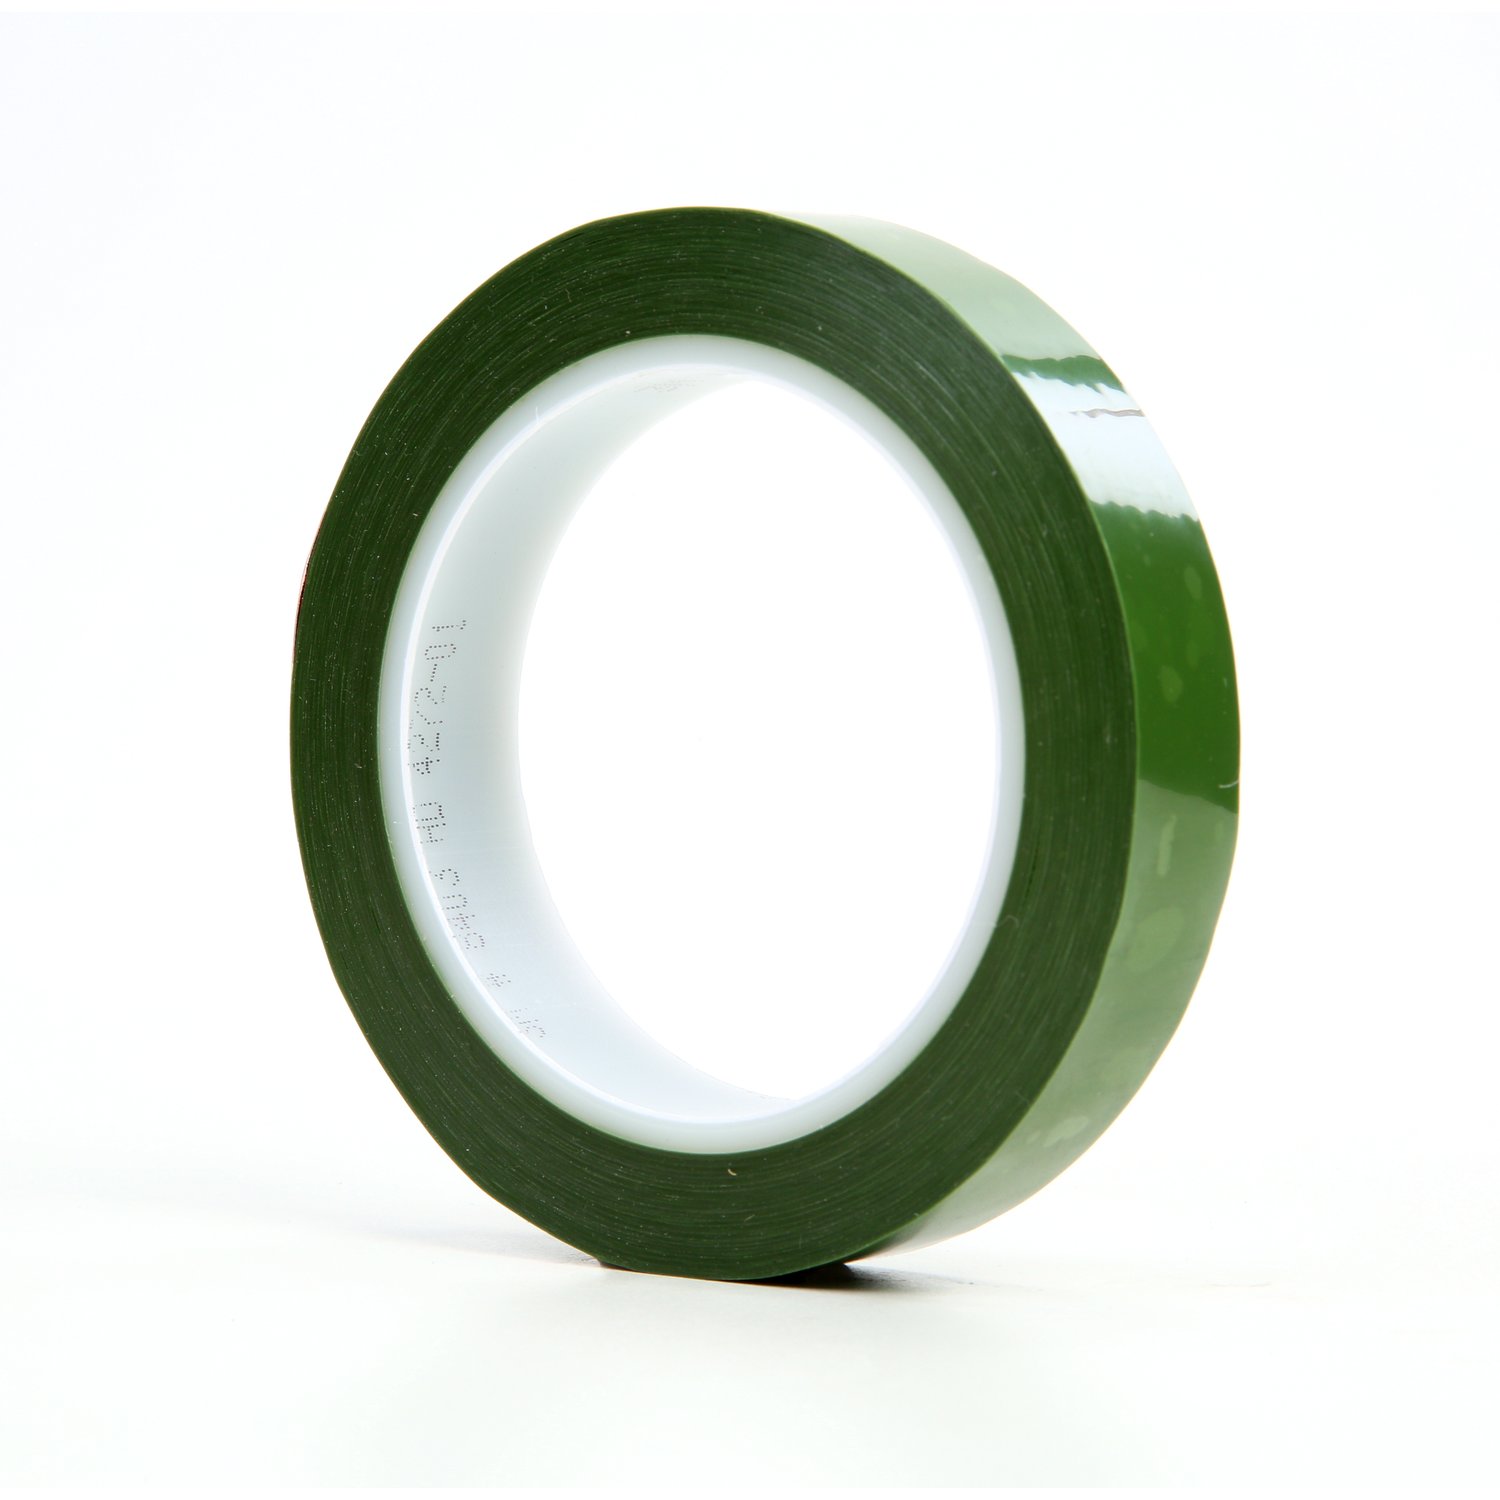 7000123422 - 3M Polyester Tape 8403, Green, 3/4 in x 72 yd, 2.4 mil, 48 rolls per
case